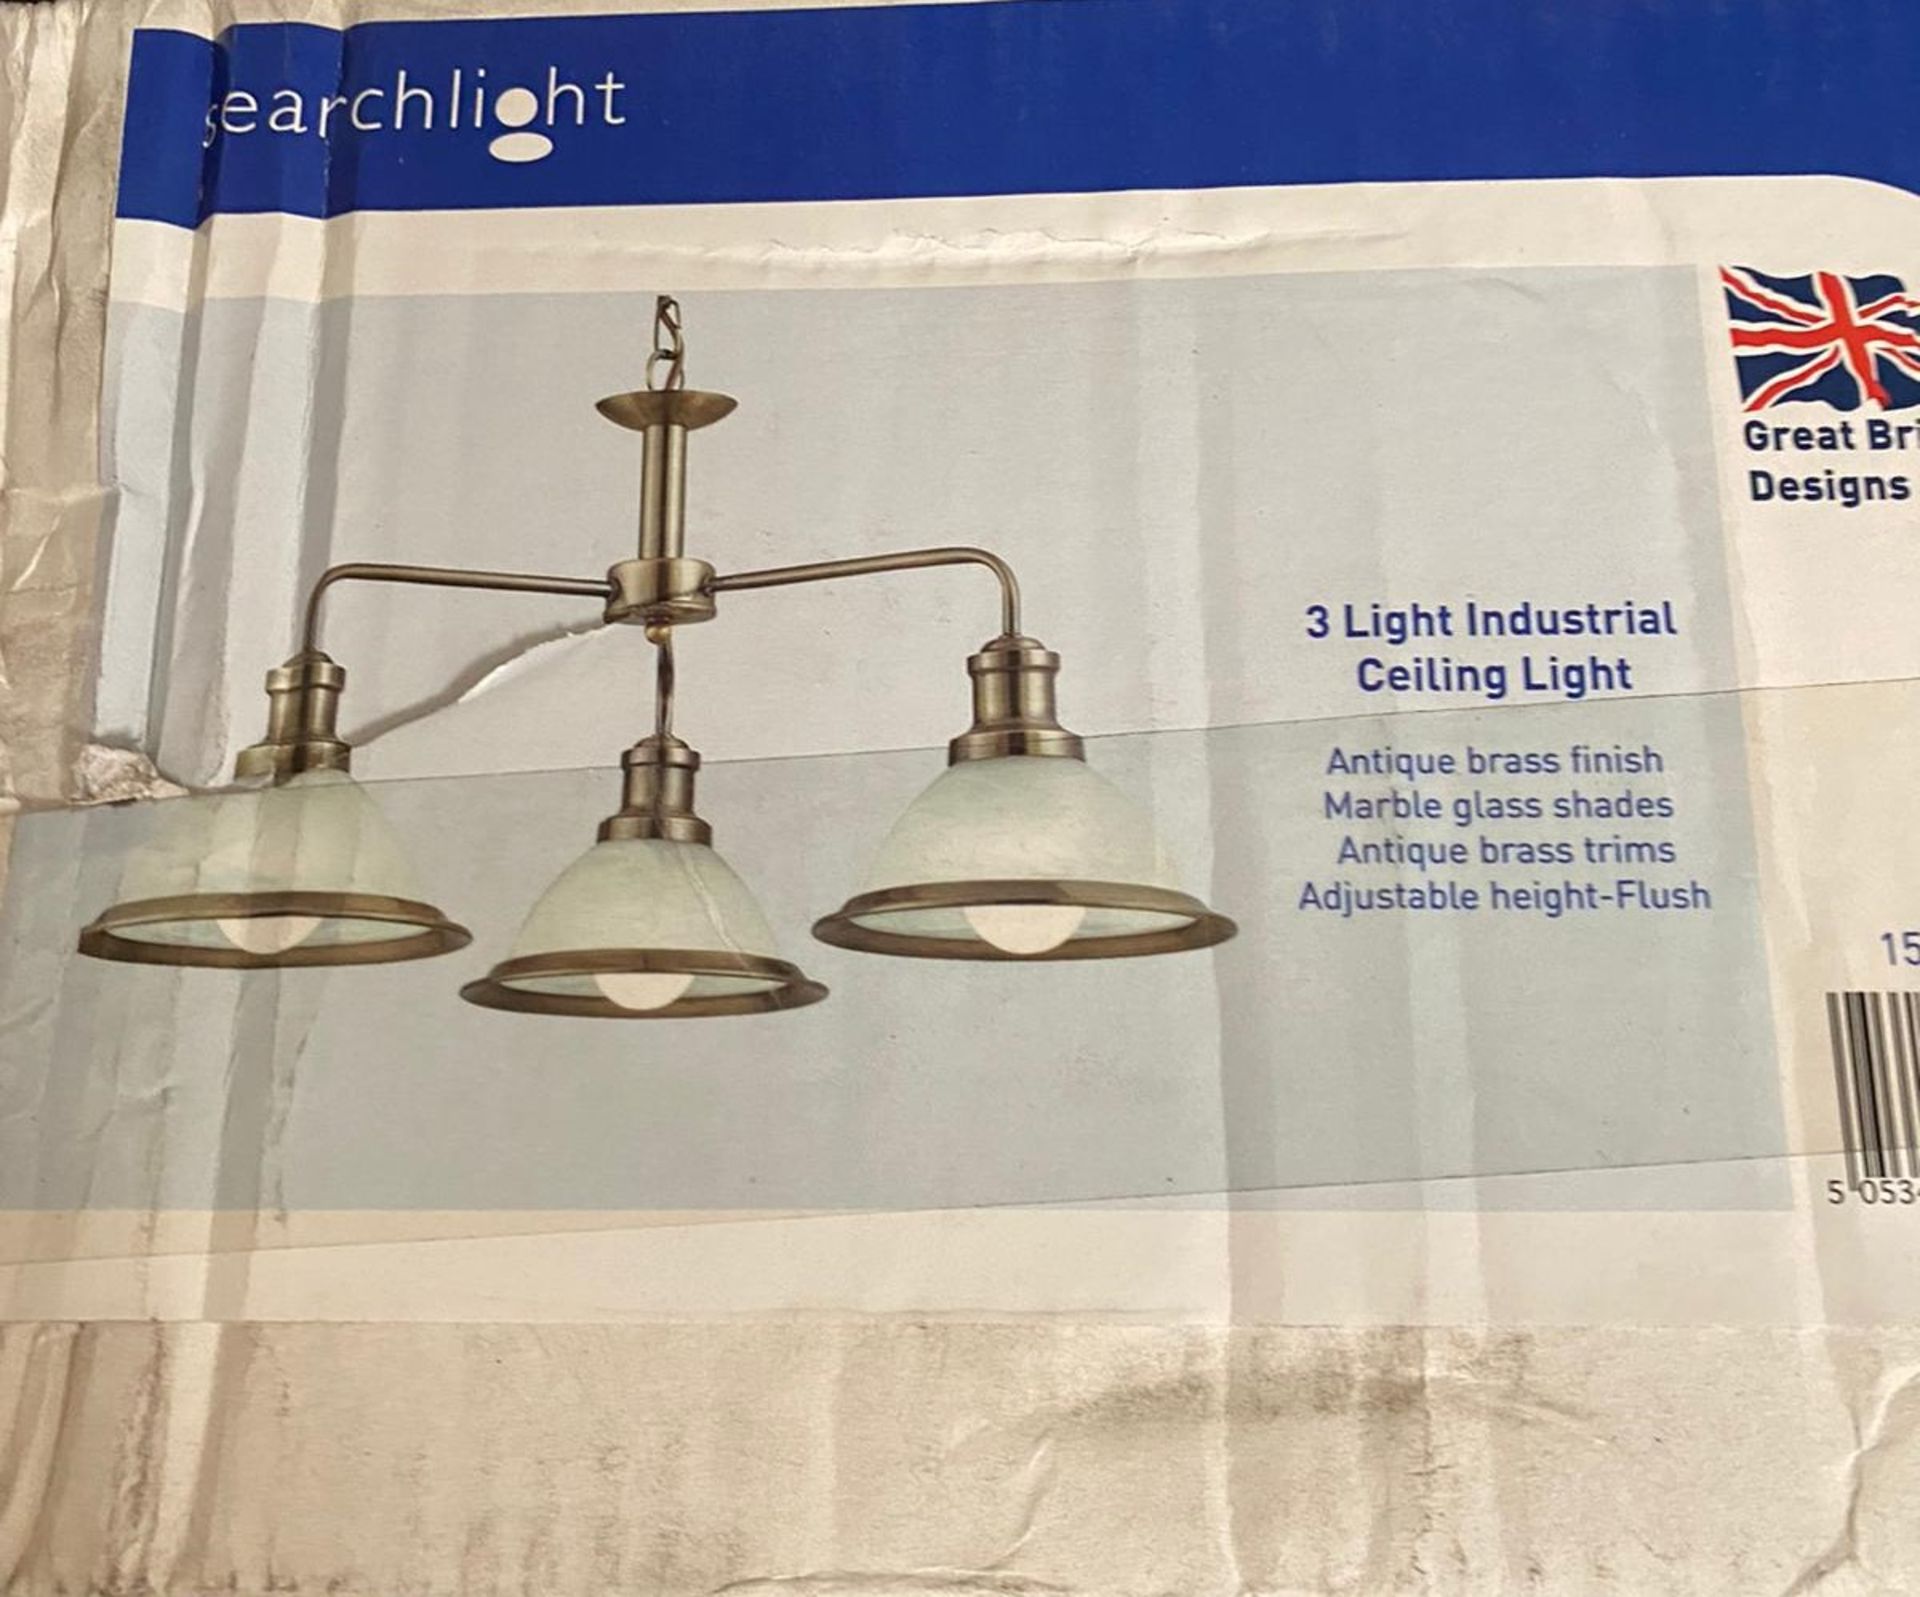 1 x Searchlight Industrial Ceiling Light in Antique Brass - Ref: 1593-3AB -New and Boxed - RRP: £100 - Image 3 of 4